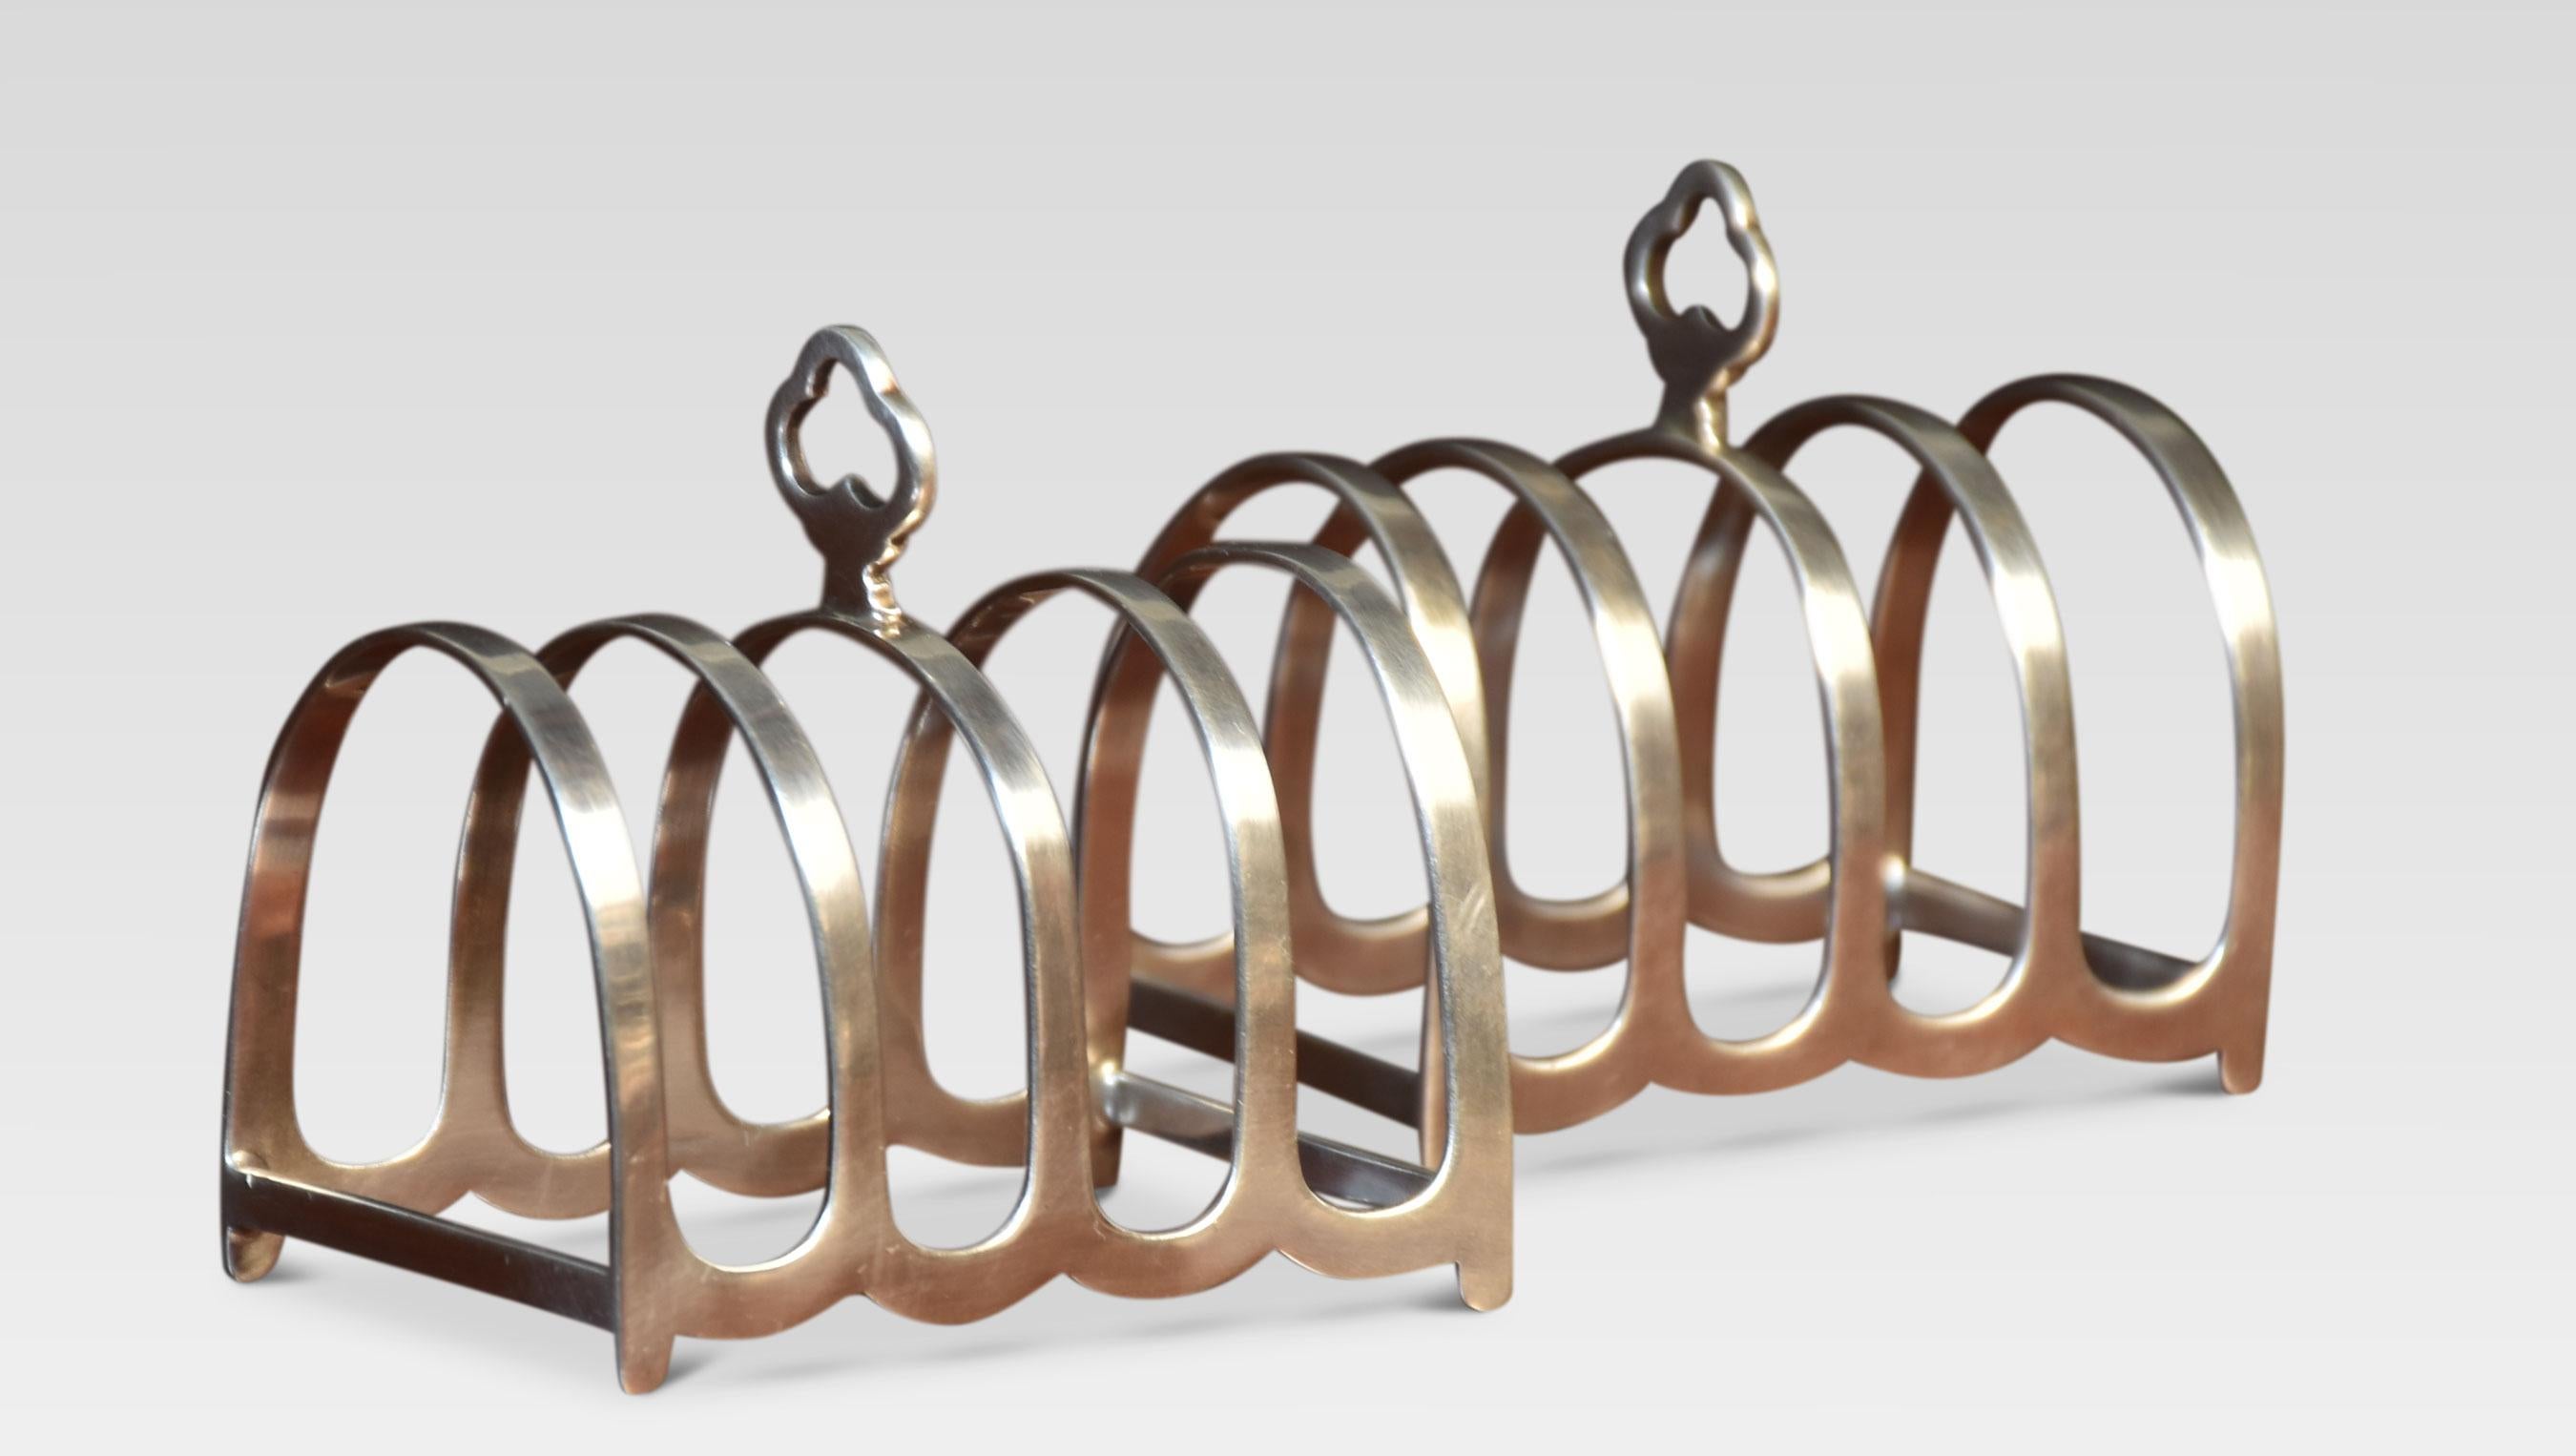 Pair of four division silver toast racks with trefoil hoop handles, stamped Chester 1932.
Dimensions
Height 3 Inches
Width 3 Inches
Depth 2 Inches